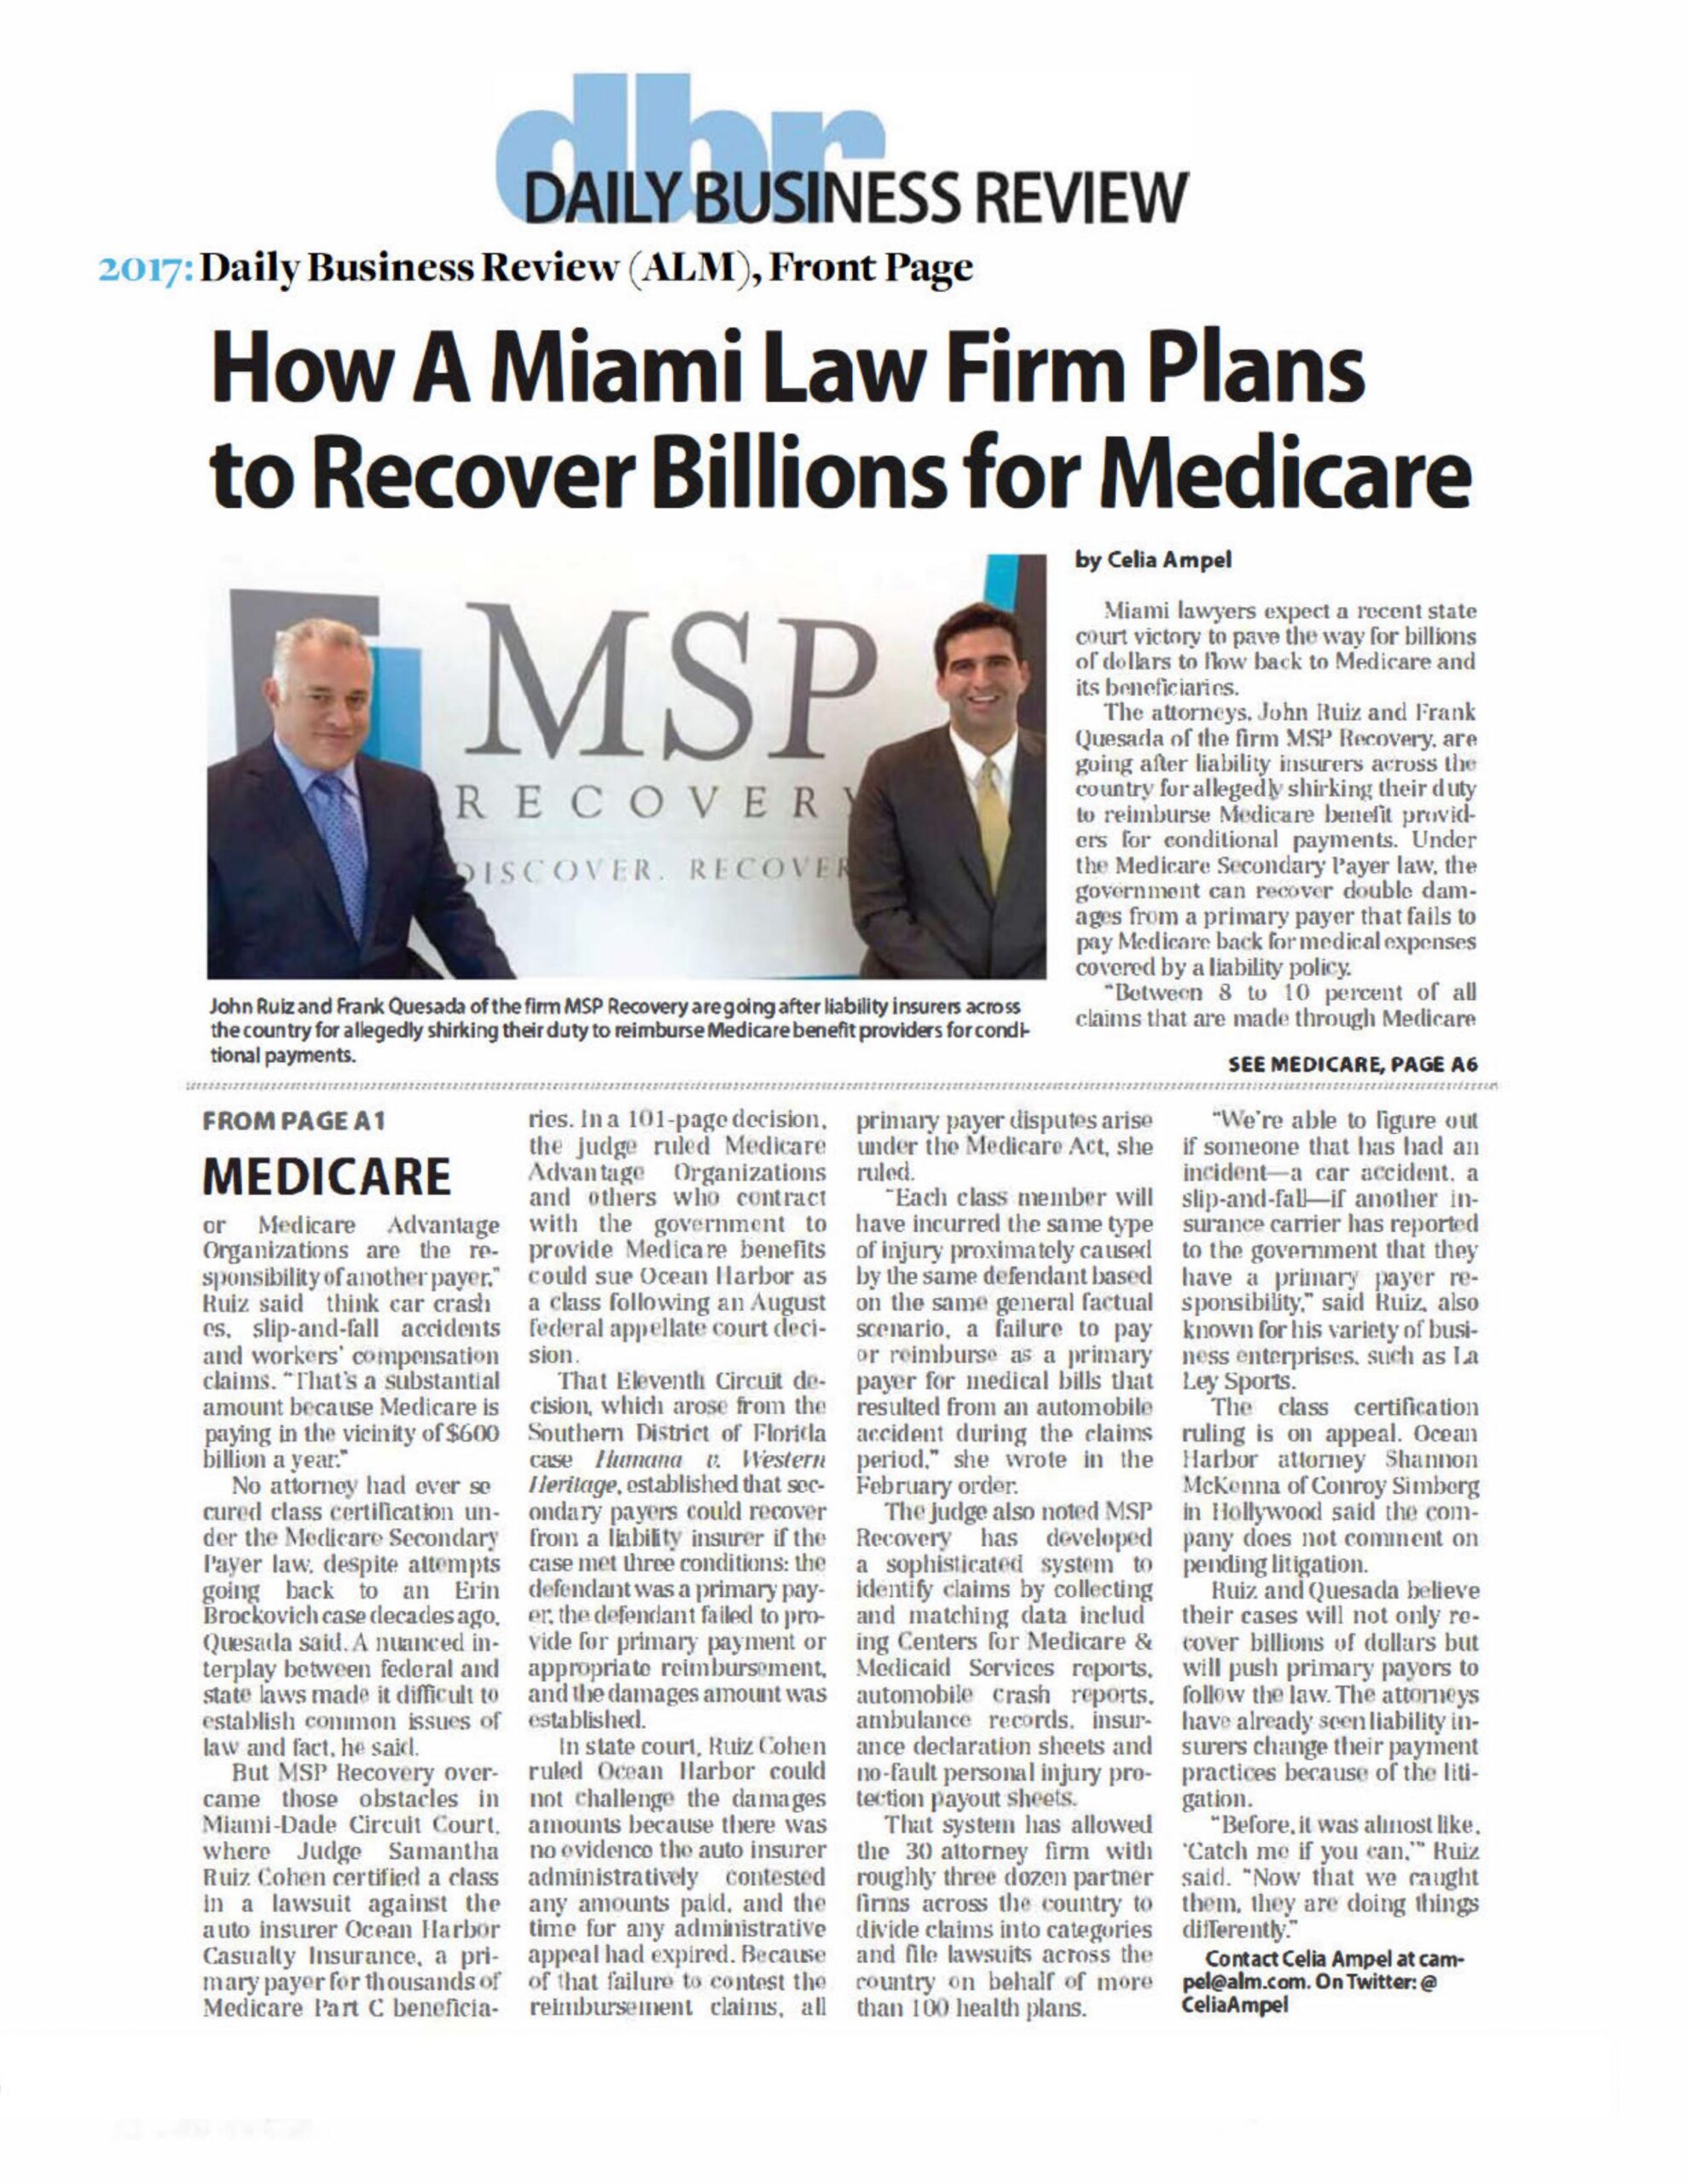 How A Miami Law Firm Plans to Recover Billions for Medicare - MSP Recovery